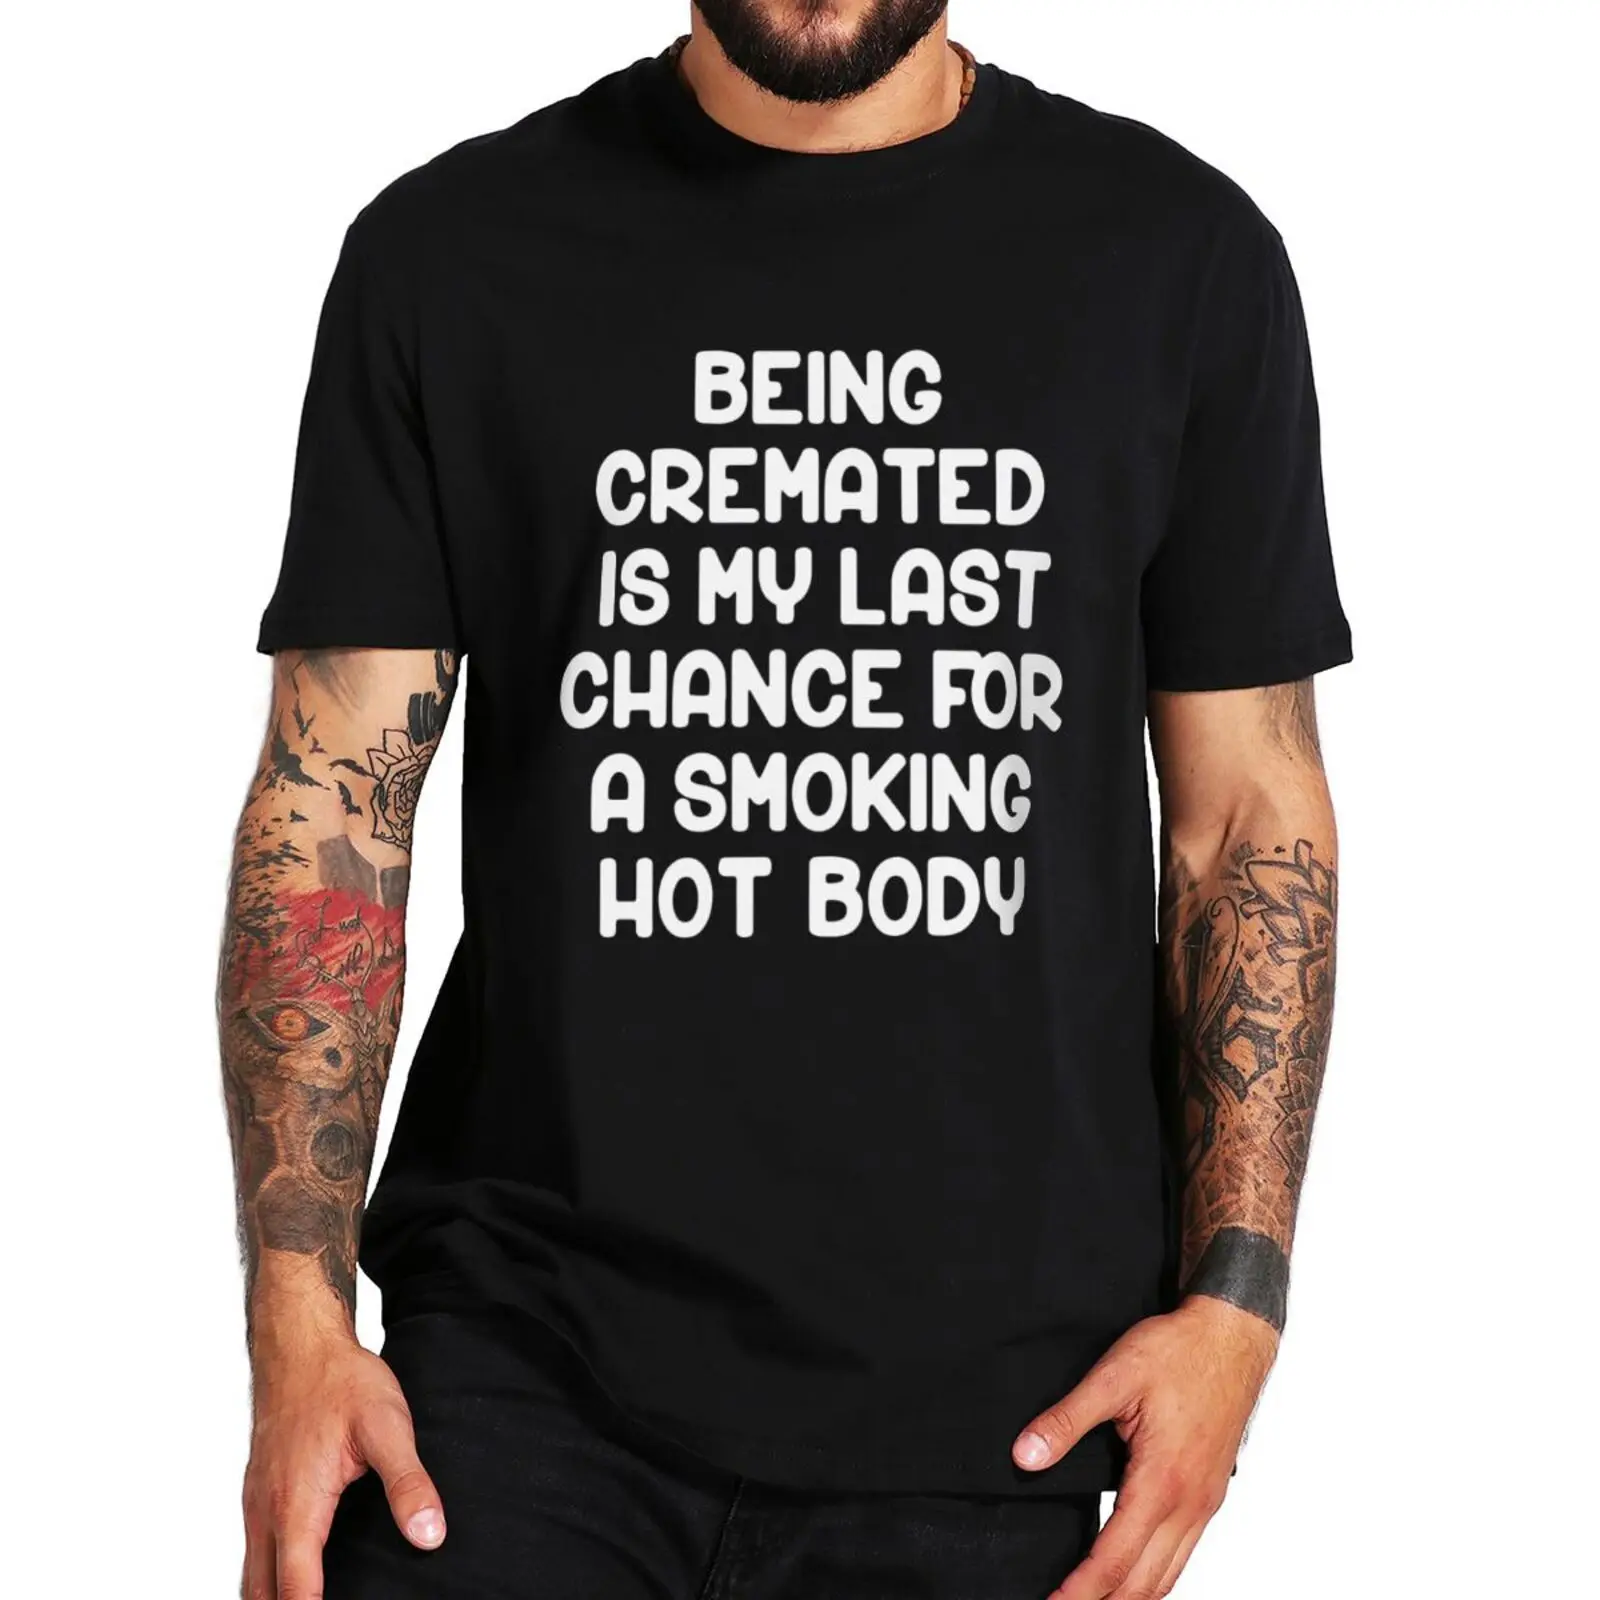 

Being Cremated Is My Last Chance For A Smoking T Shirt Funny Saying Sarcastic Novelty Tee Summer Casual 100% Cotton T-shirts